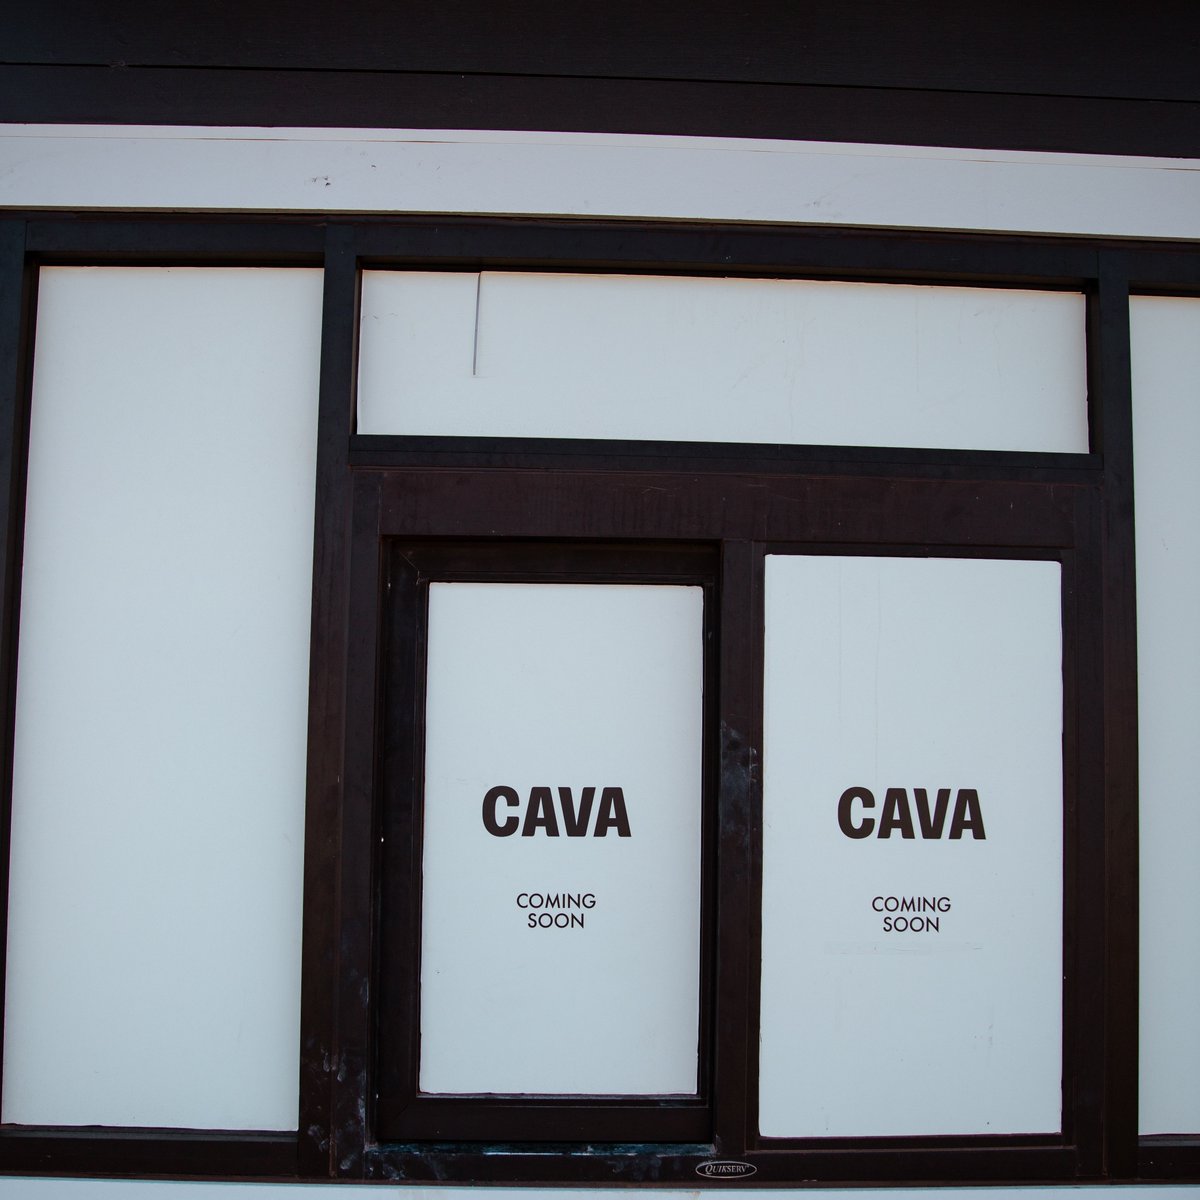 The doors to @cava are OPEN! 👏 Make plans to come to Town Madison this weekend and enjoy some delicious Mediterranean food.

#TownMadison #MadisonAlabama #MadisonAL #Visitnorthal #Huntsville #HunstsvilleAL #HSV #huntsvillefoodies #allthingsmadison